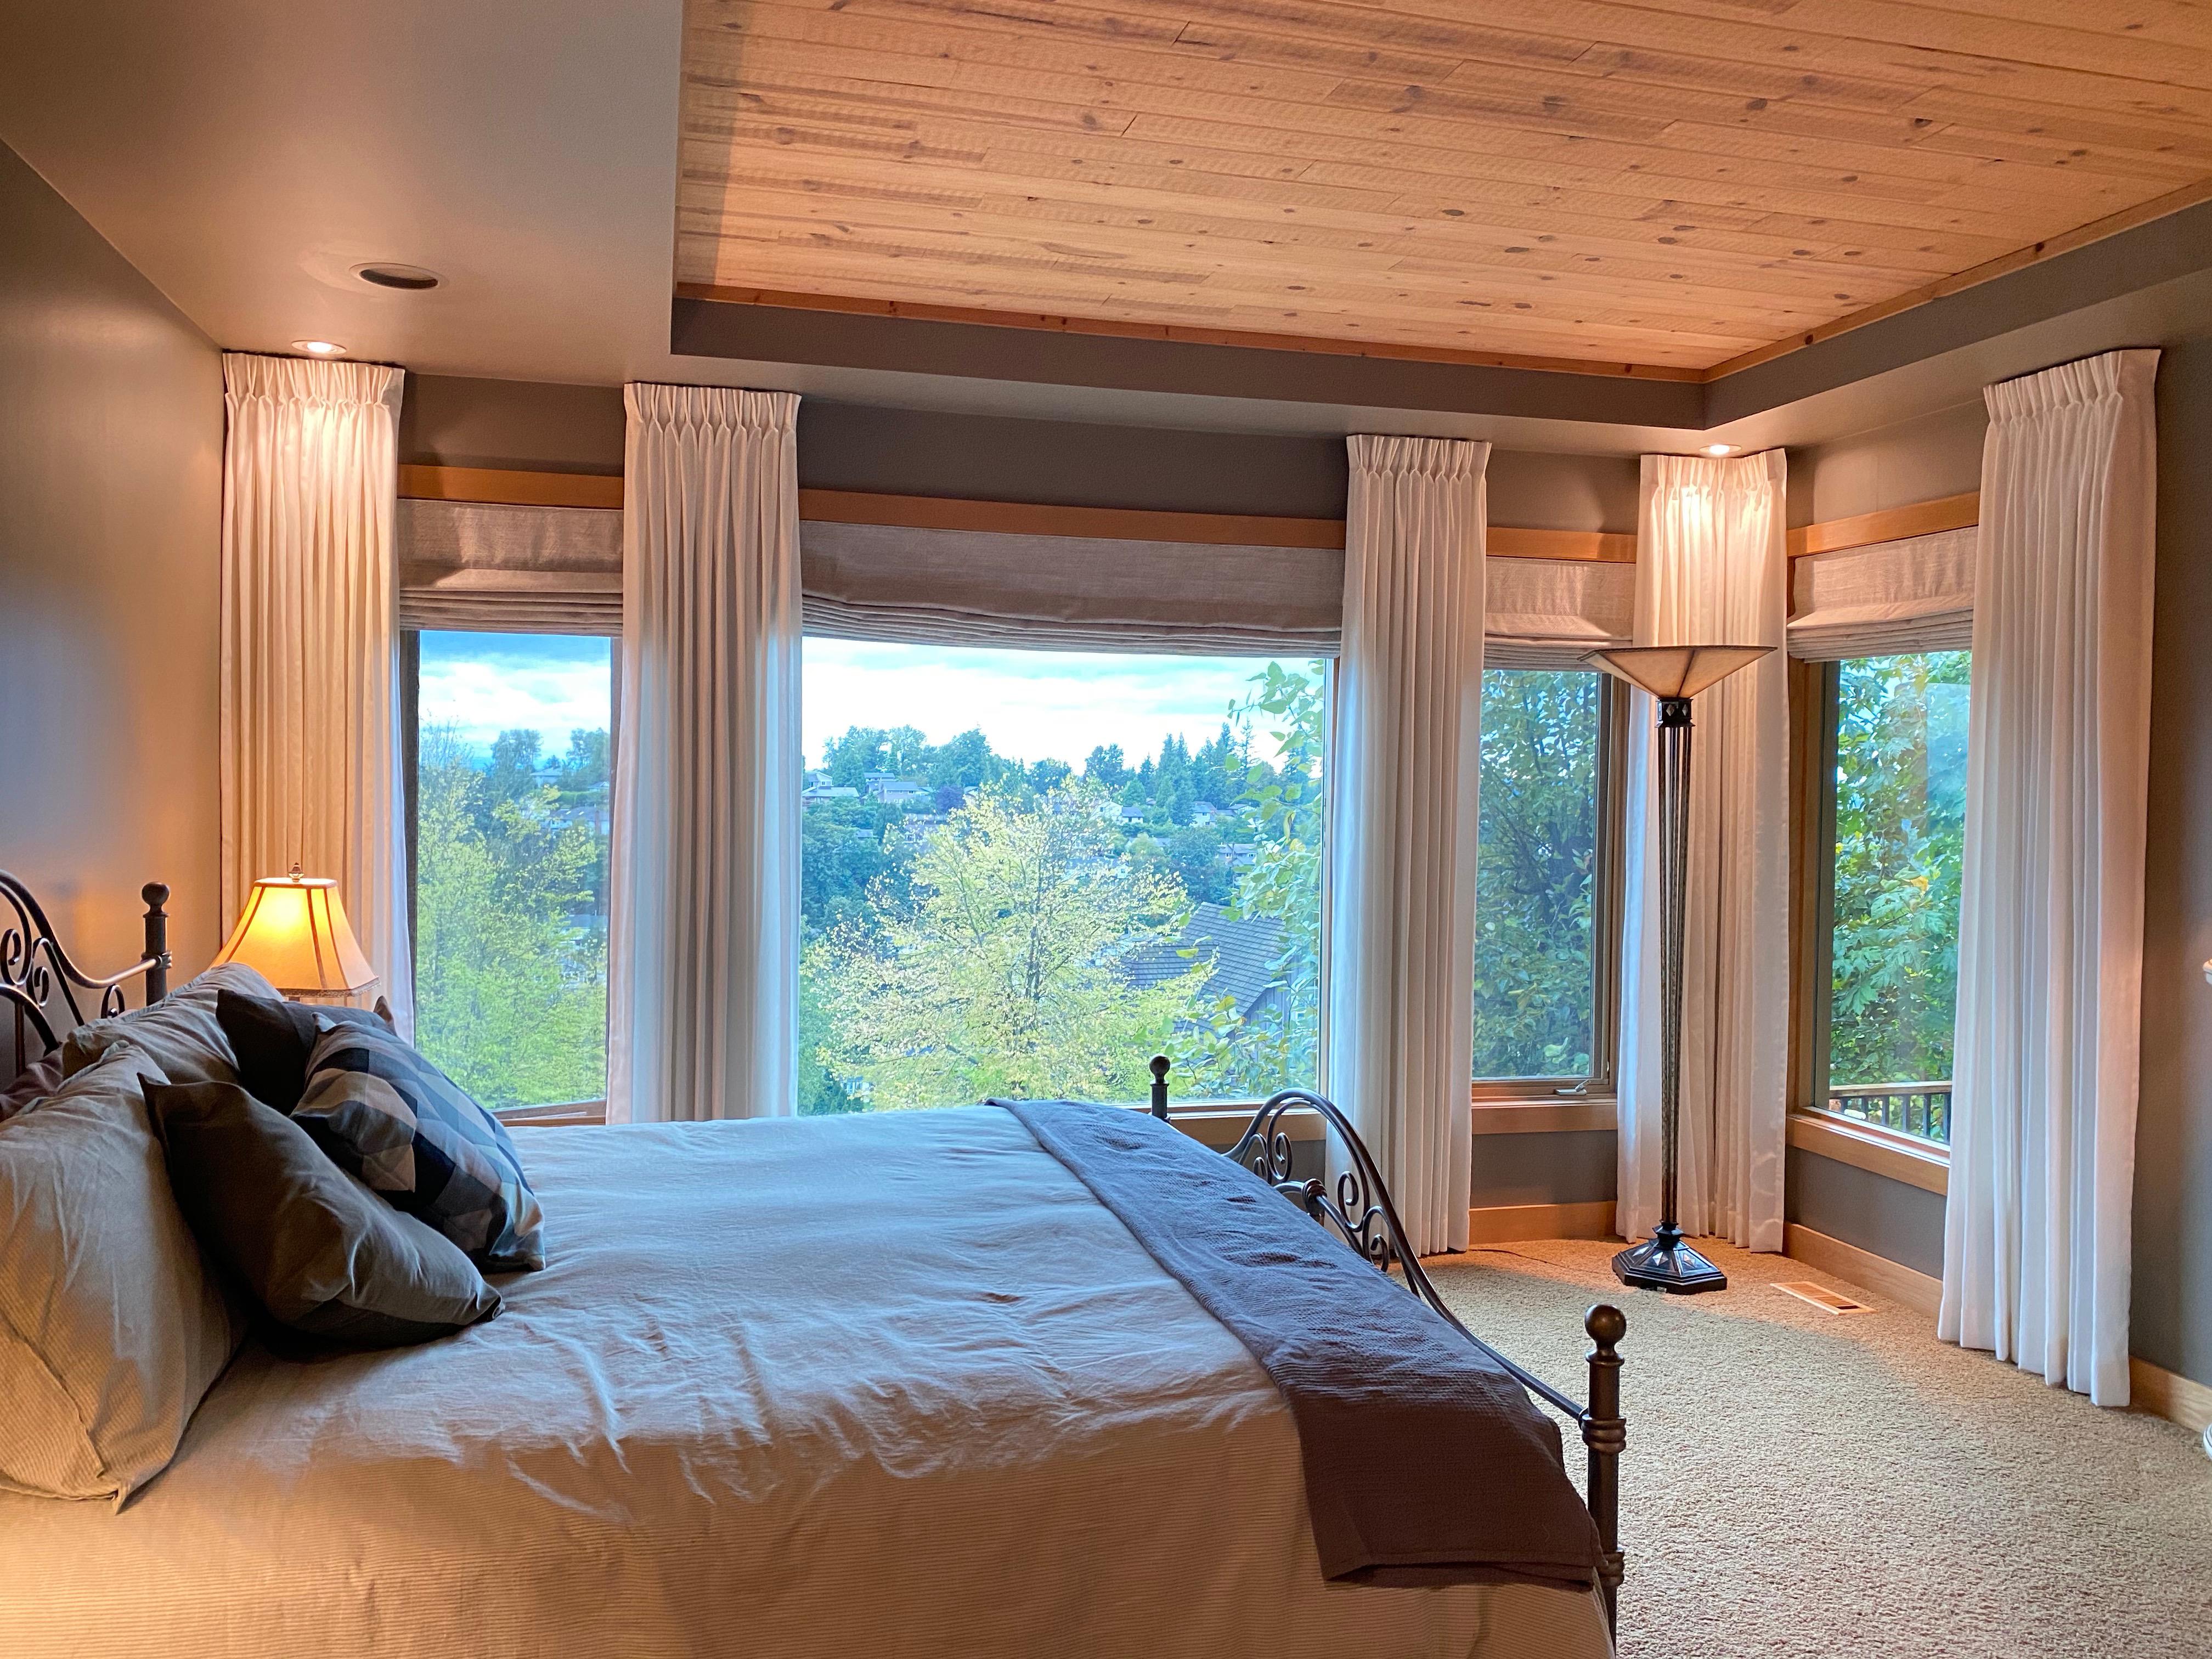 Stationary Drapery Panels and Roman Shades Budget Blinds of Chilliwack, Hope and Harrison Chilliwack (604)824-0375